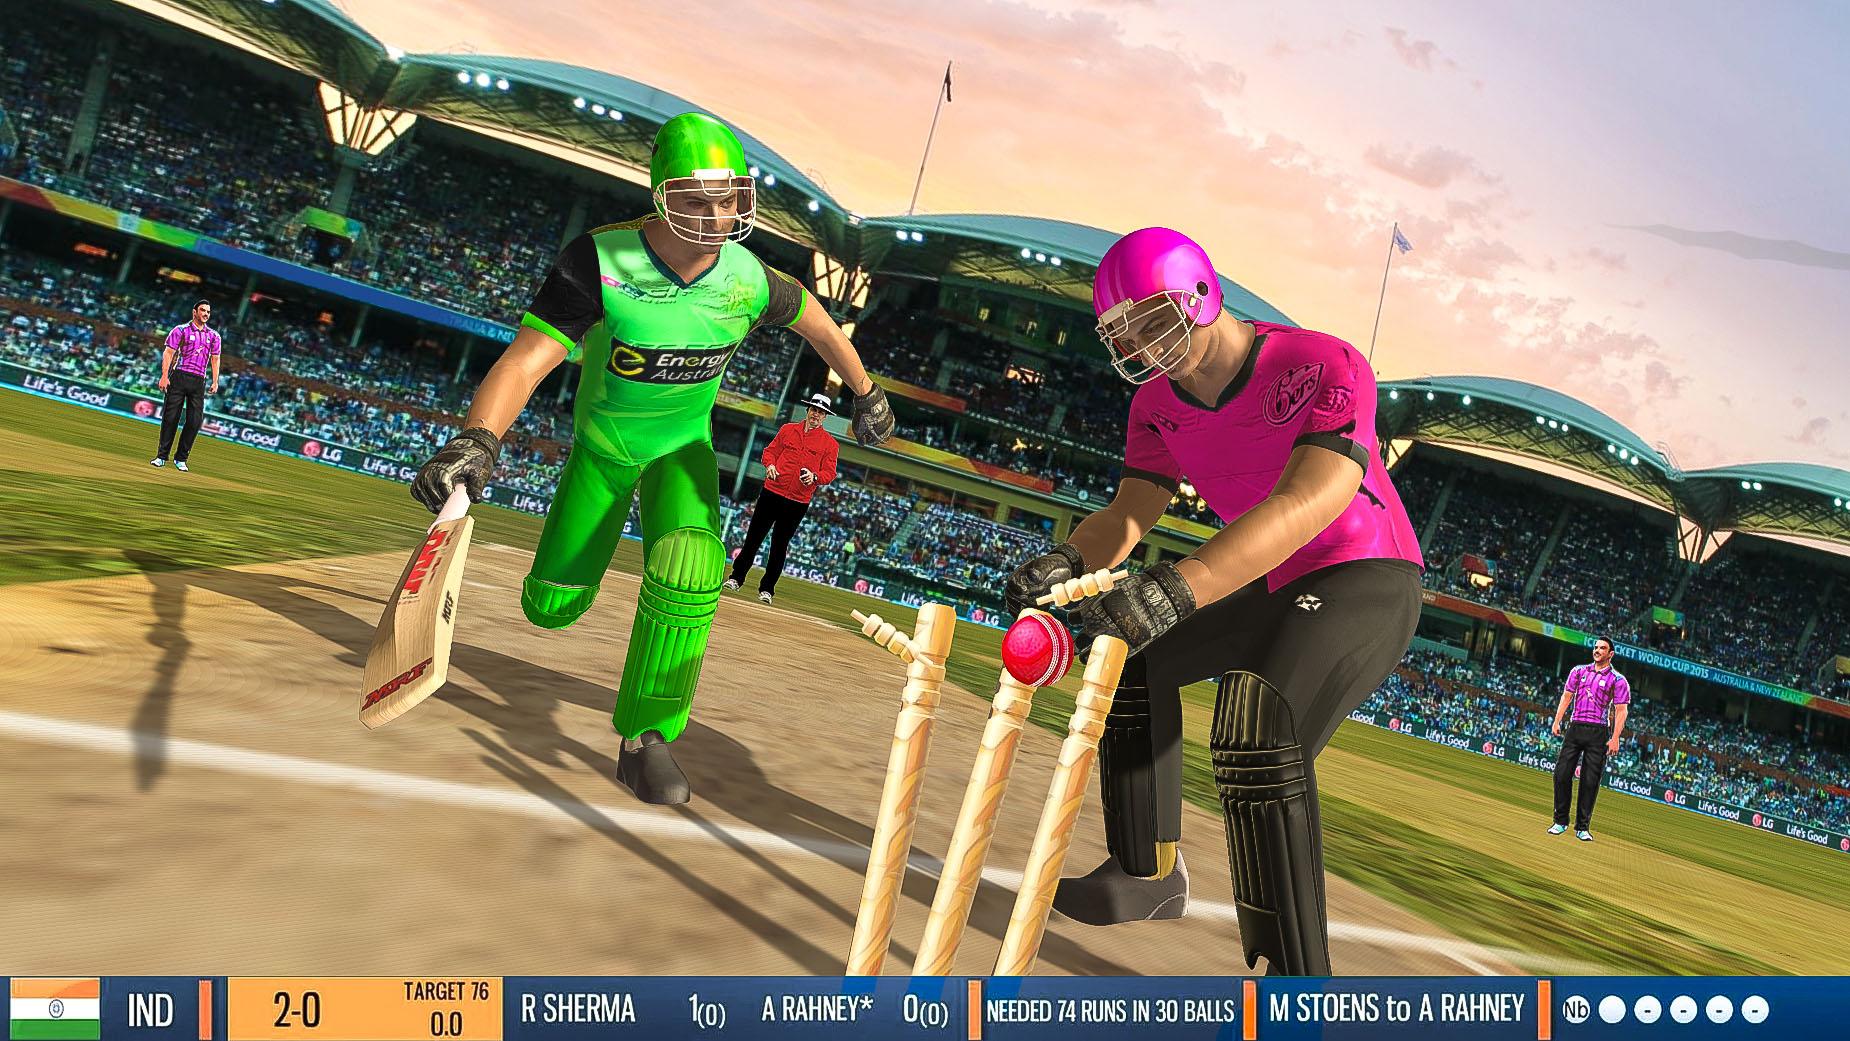 Play With Friends-Real Cricket Craze 1.1 Screenshot 1